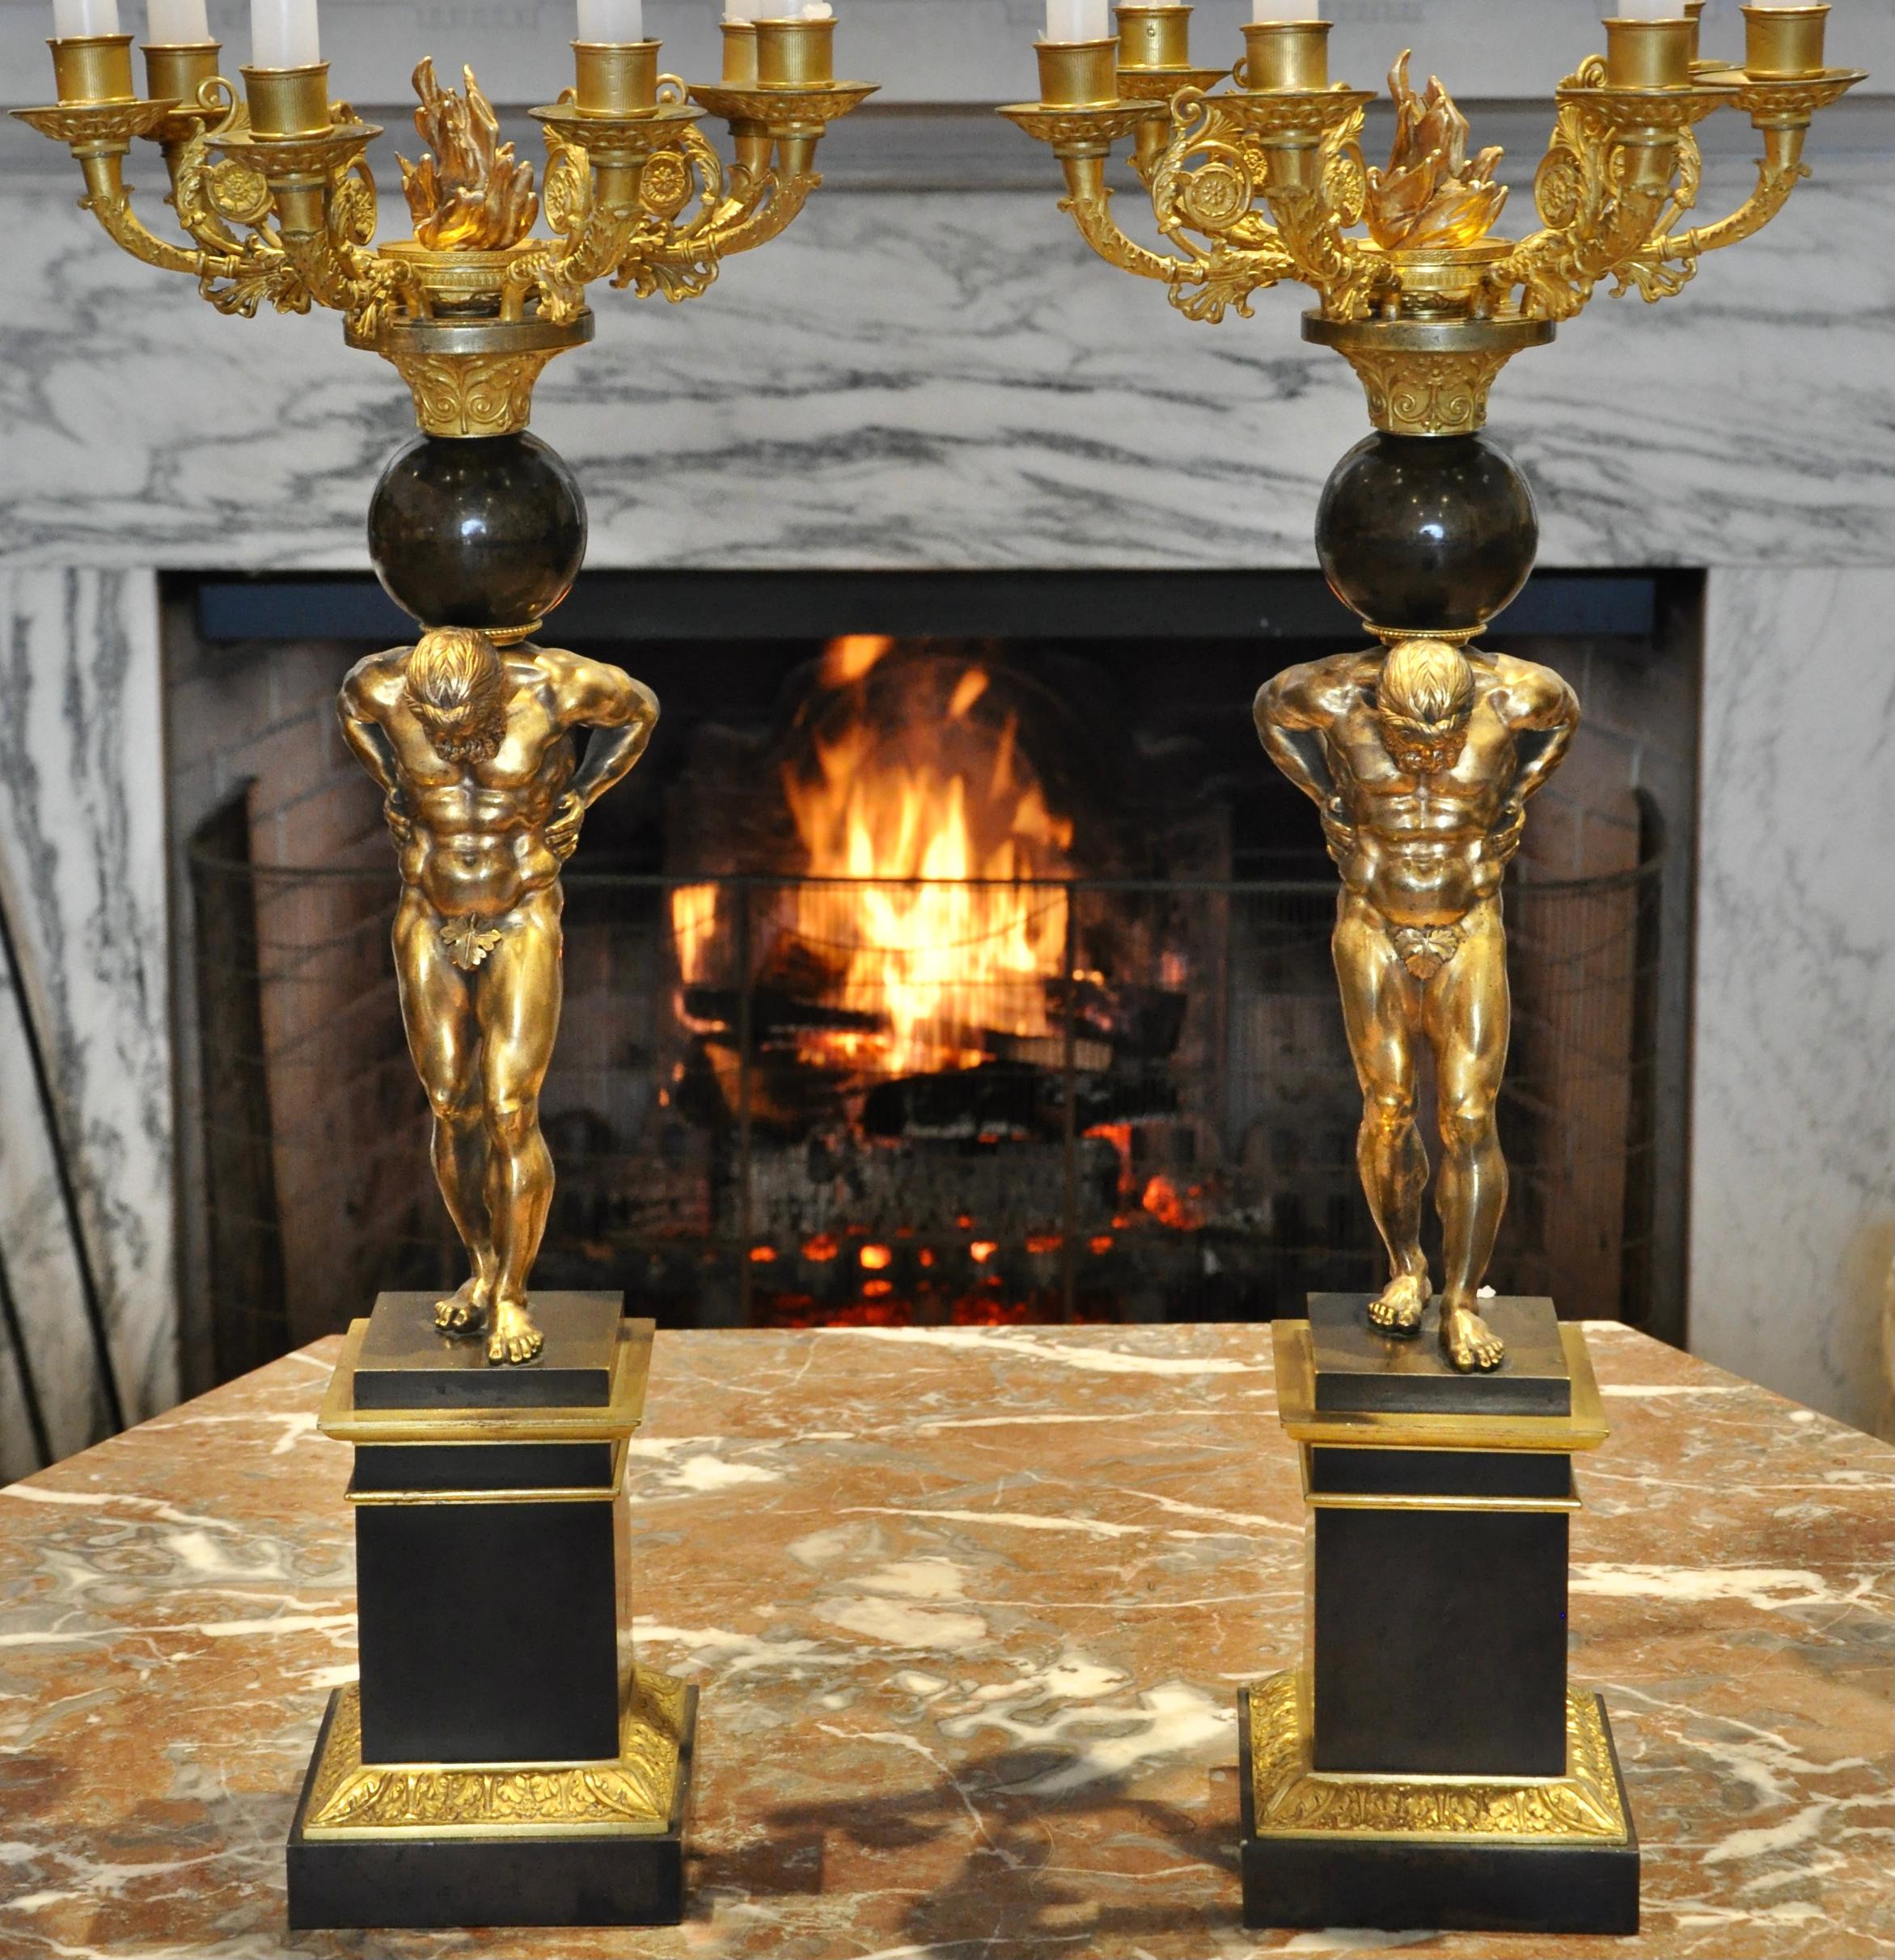 Pair of Regency or William IV figural candelabra in form of Atlas and a globe. Six arms issuing from top. Patinated bronze, gilded bronze and bronze. A truly rare from. Attributed to messenger. Neoclassical.